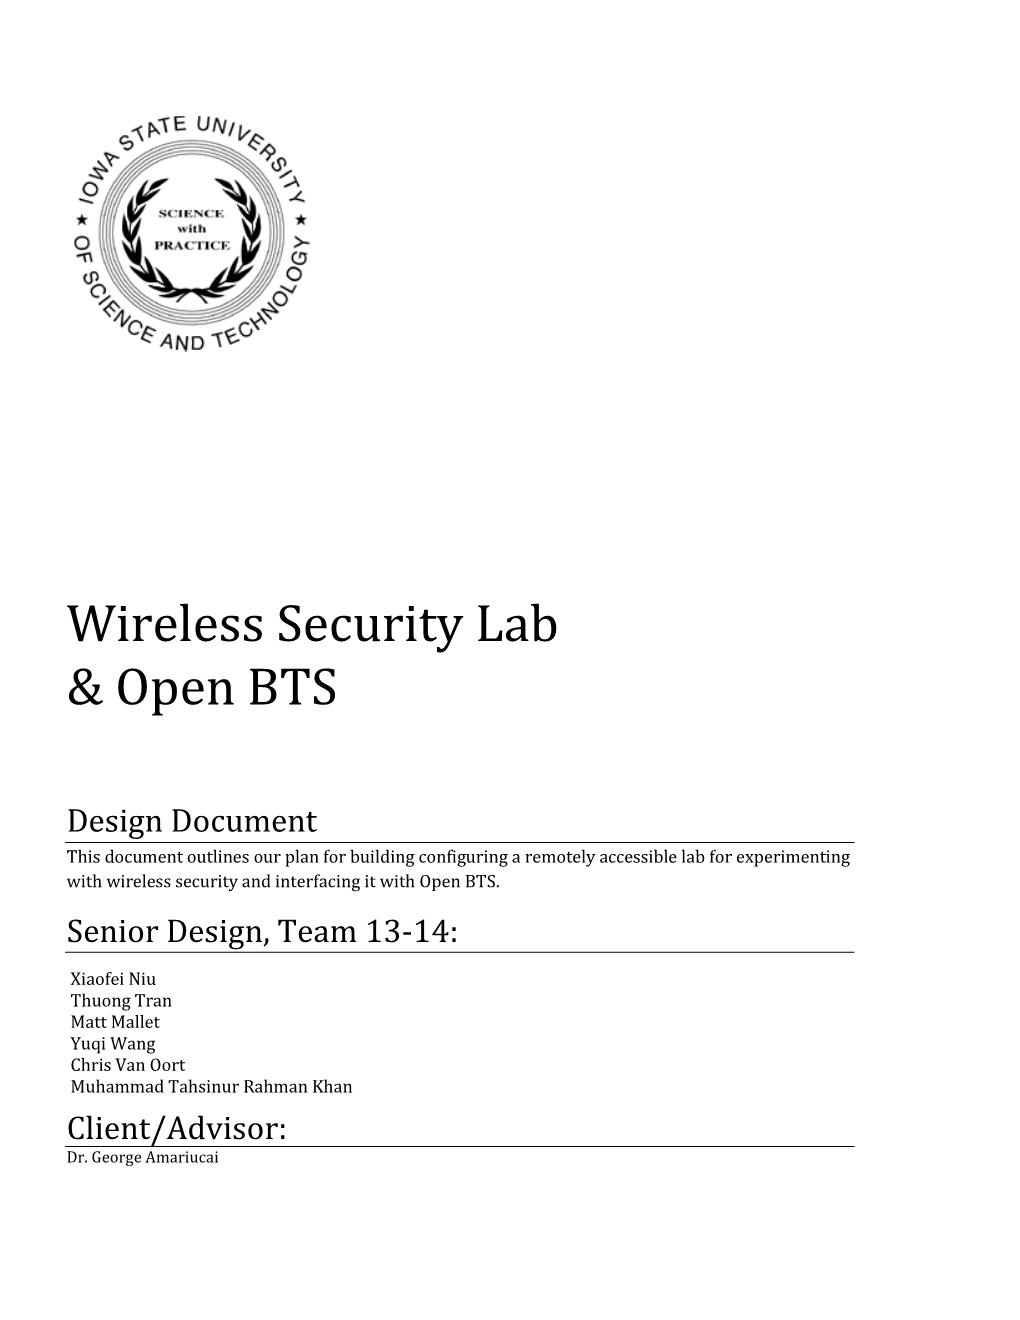 Wireless Security Lab & Open